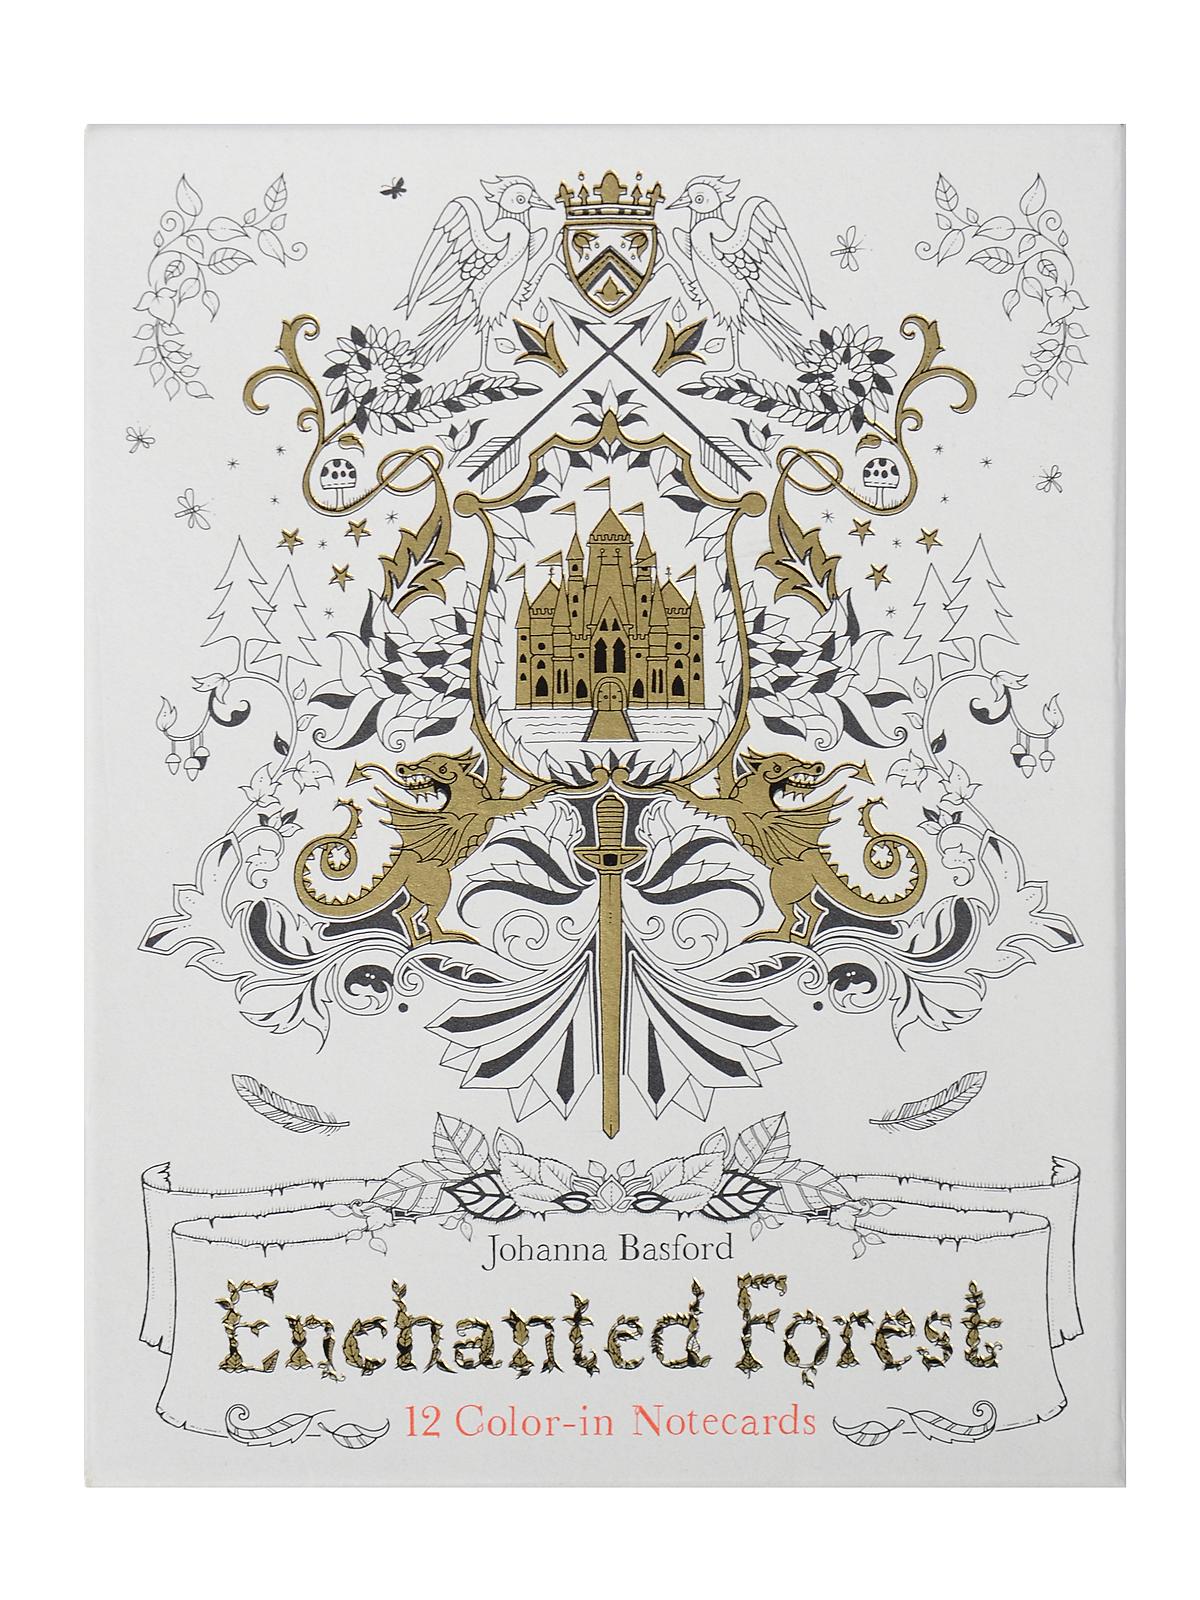 Enchanted Forest Notecards